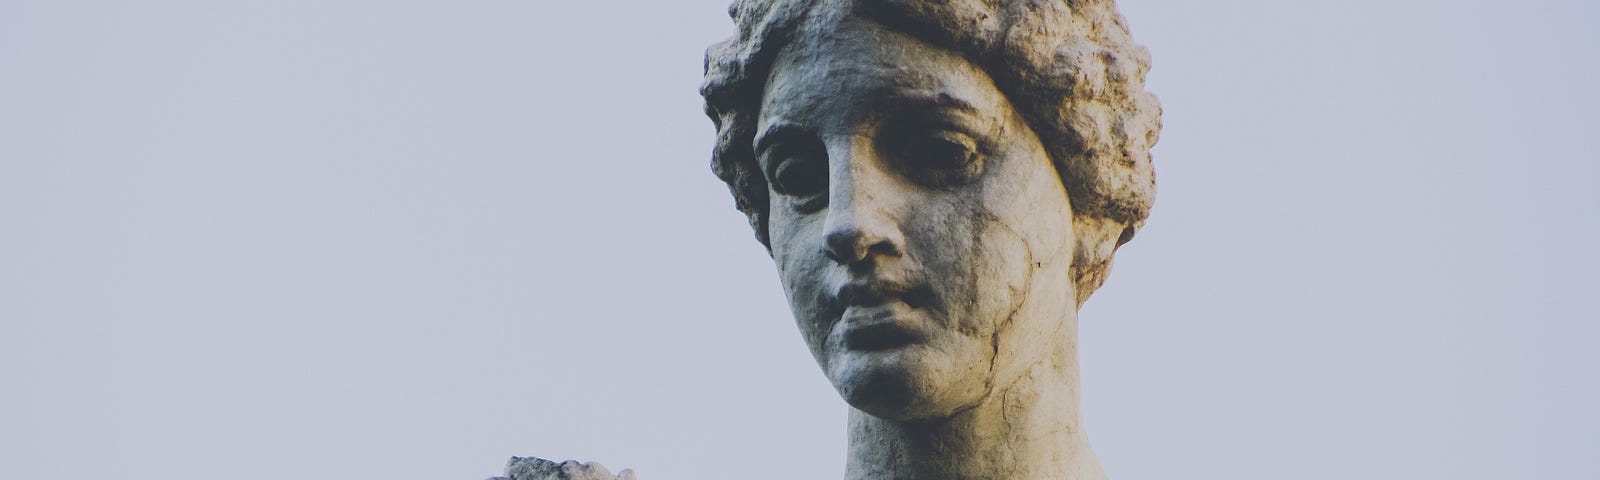 An ancient sculpture of Greek Goddess Artemis, known to the Romans as Diana.